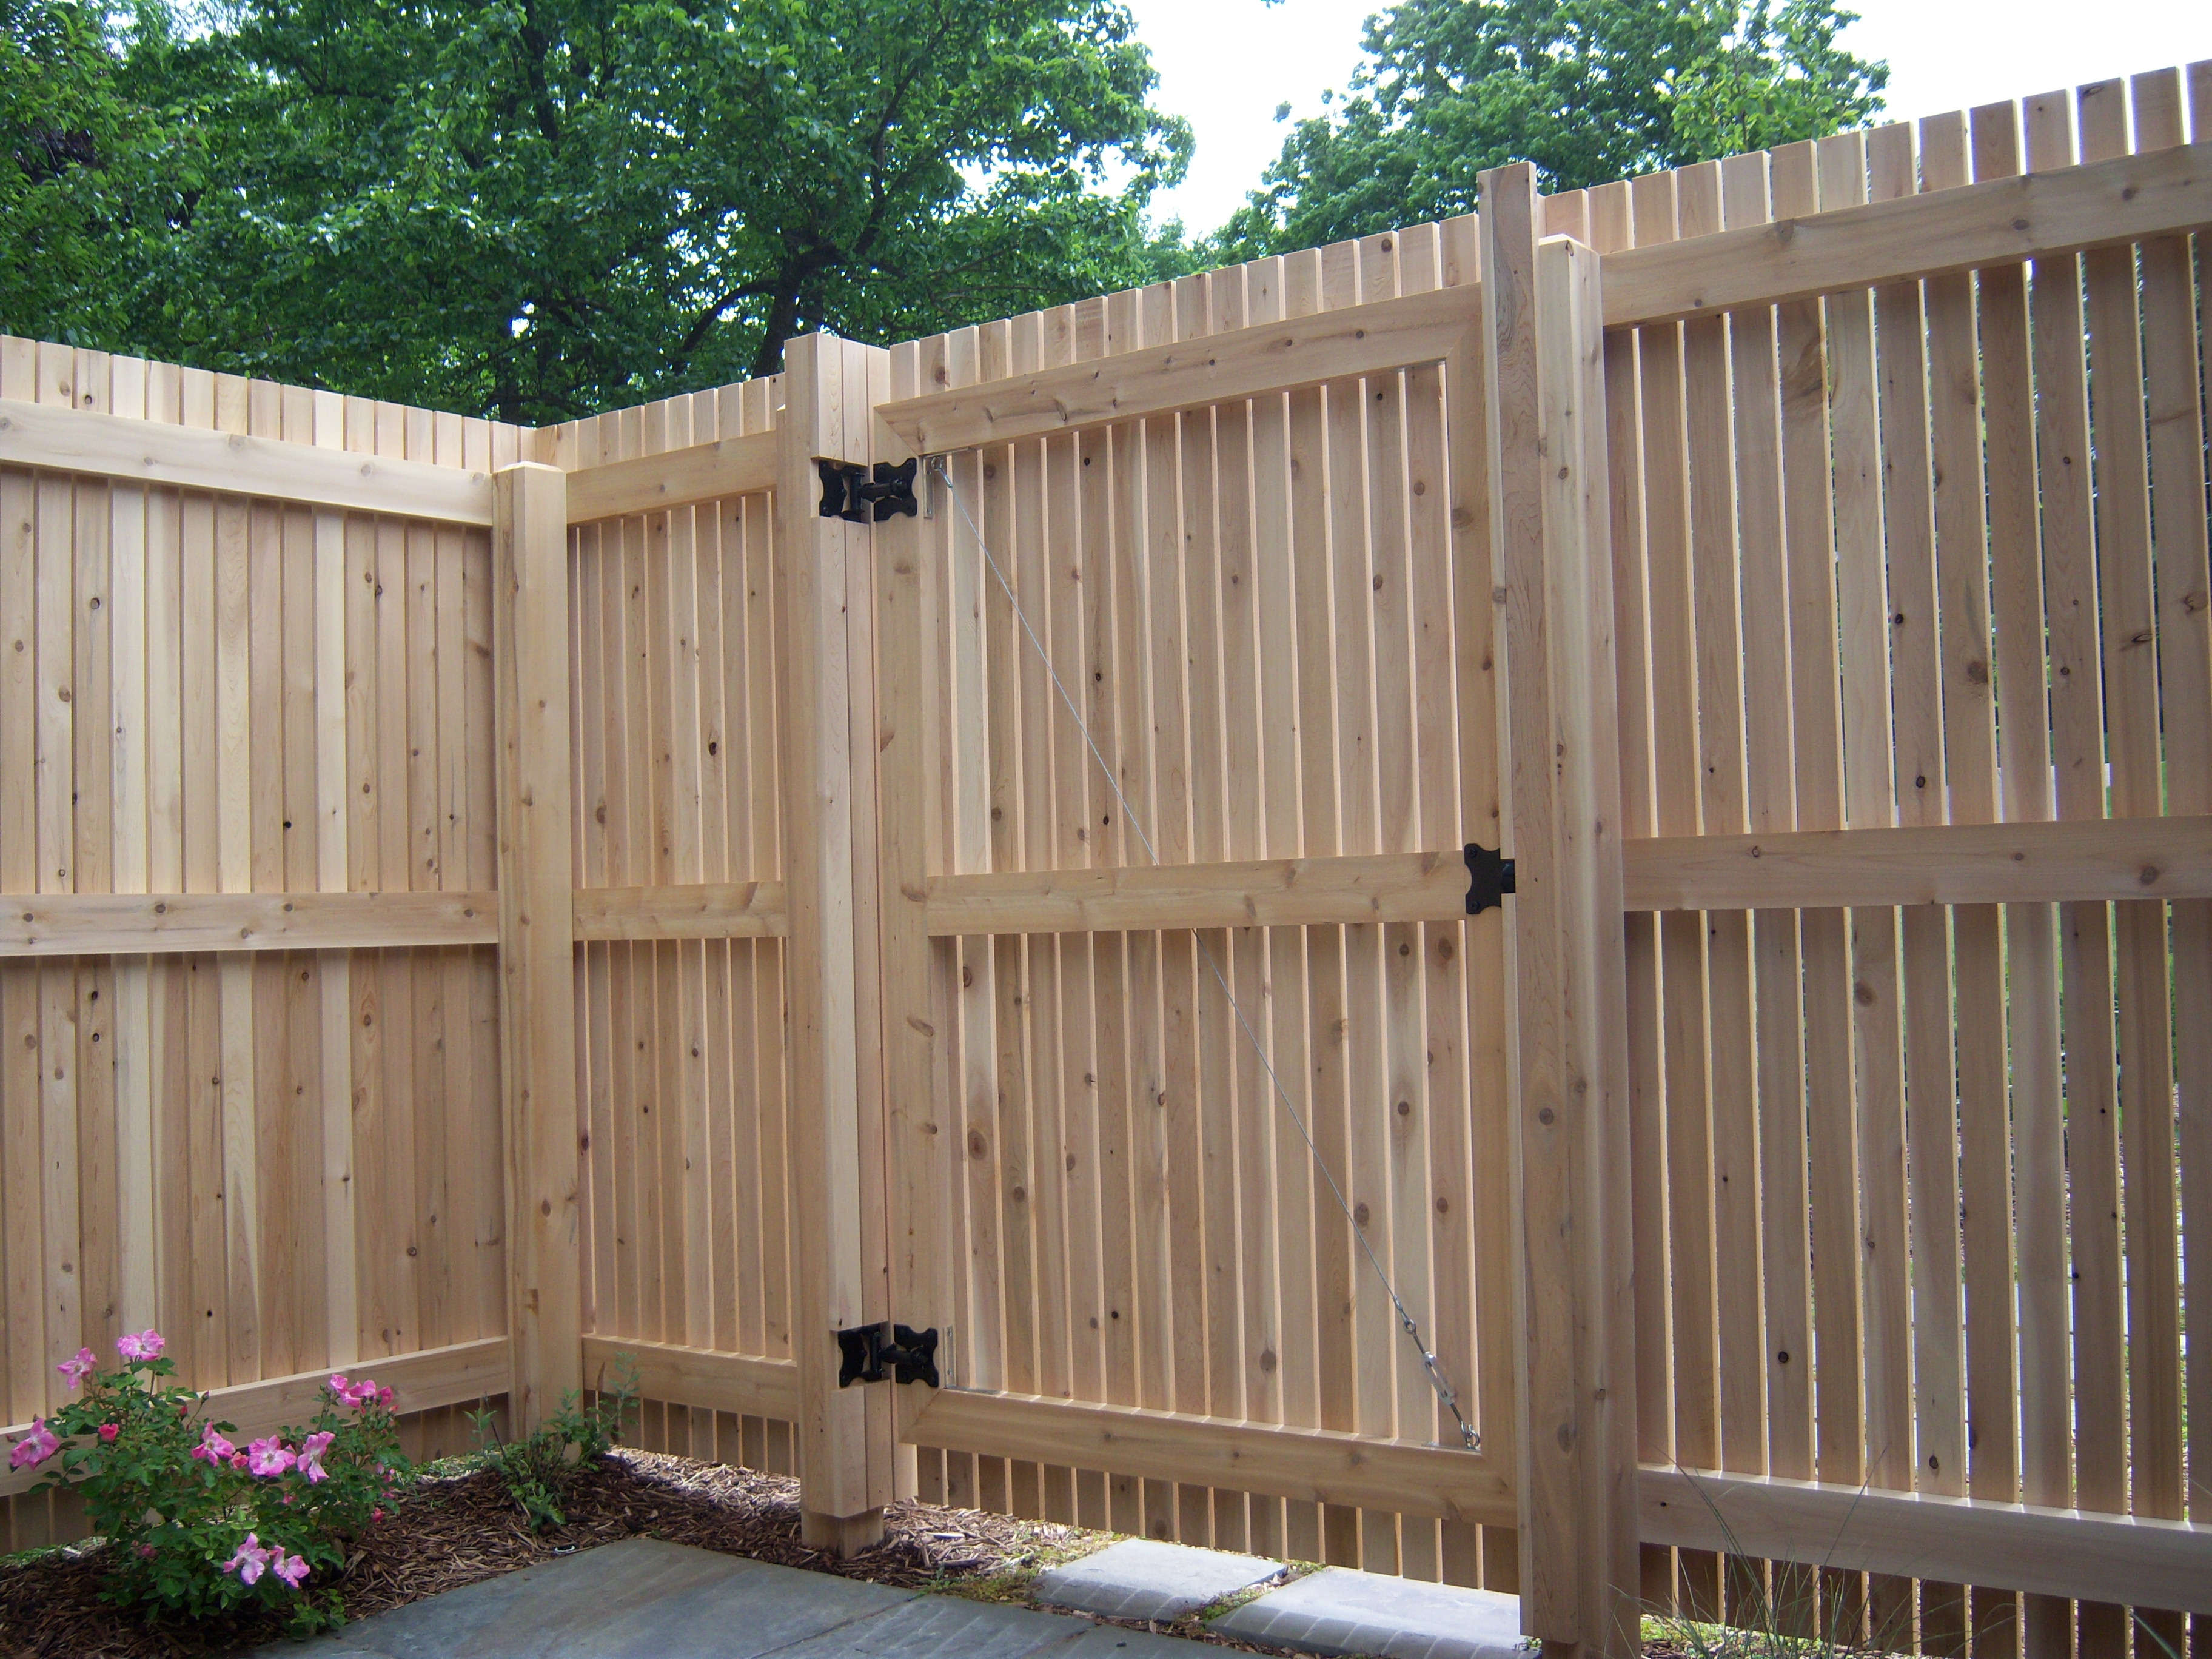 How to Build a Wood Fence Gate | Black Belt Review